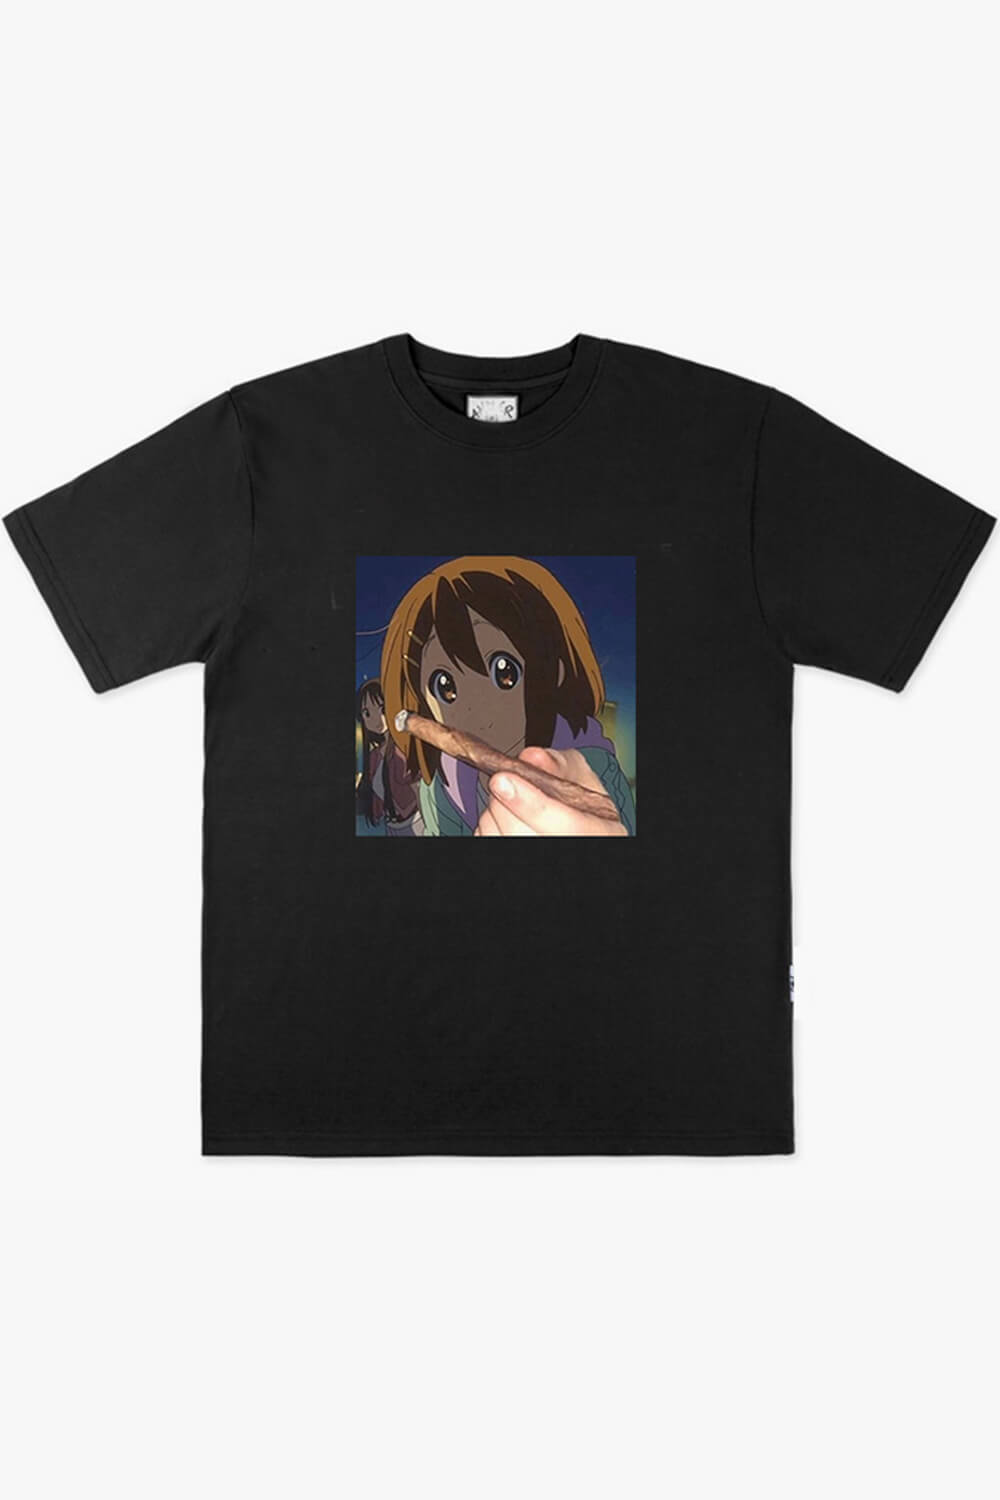 K-On Yuri Rolled a Joint T-Shirt